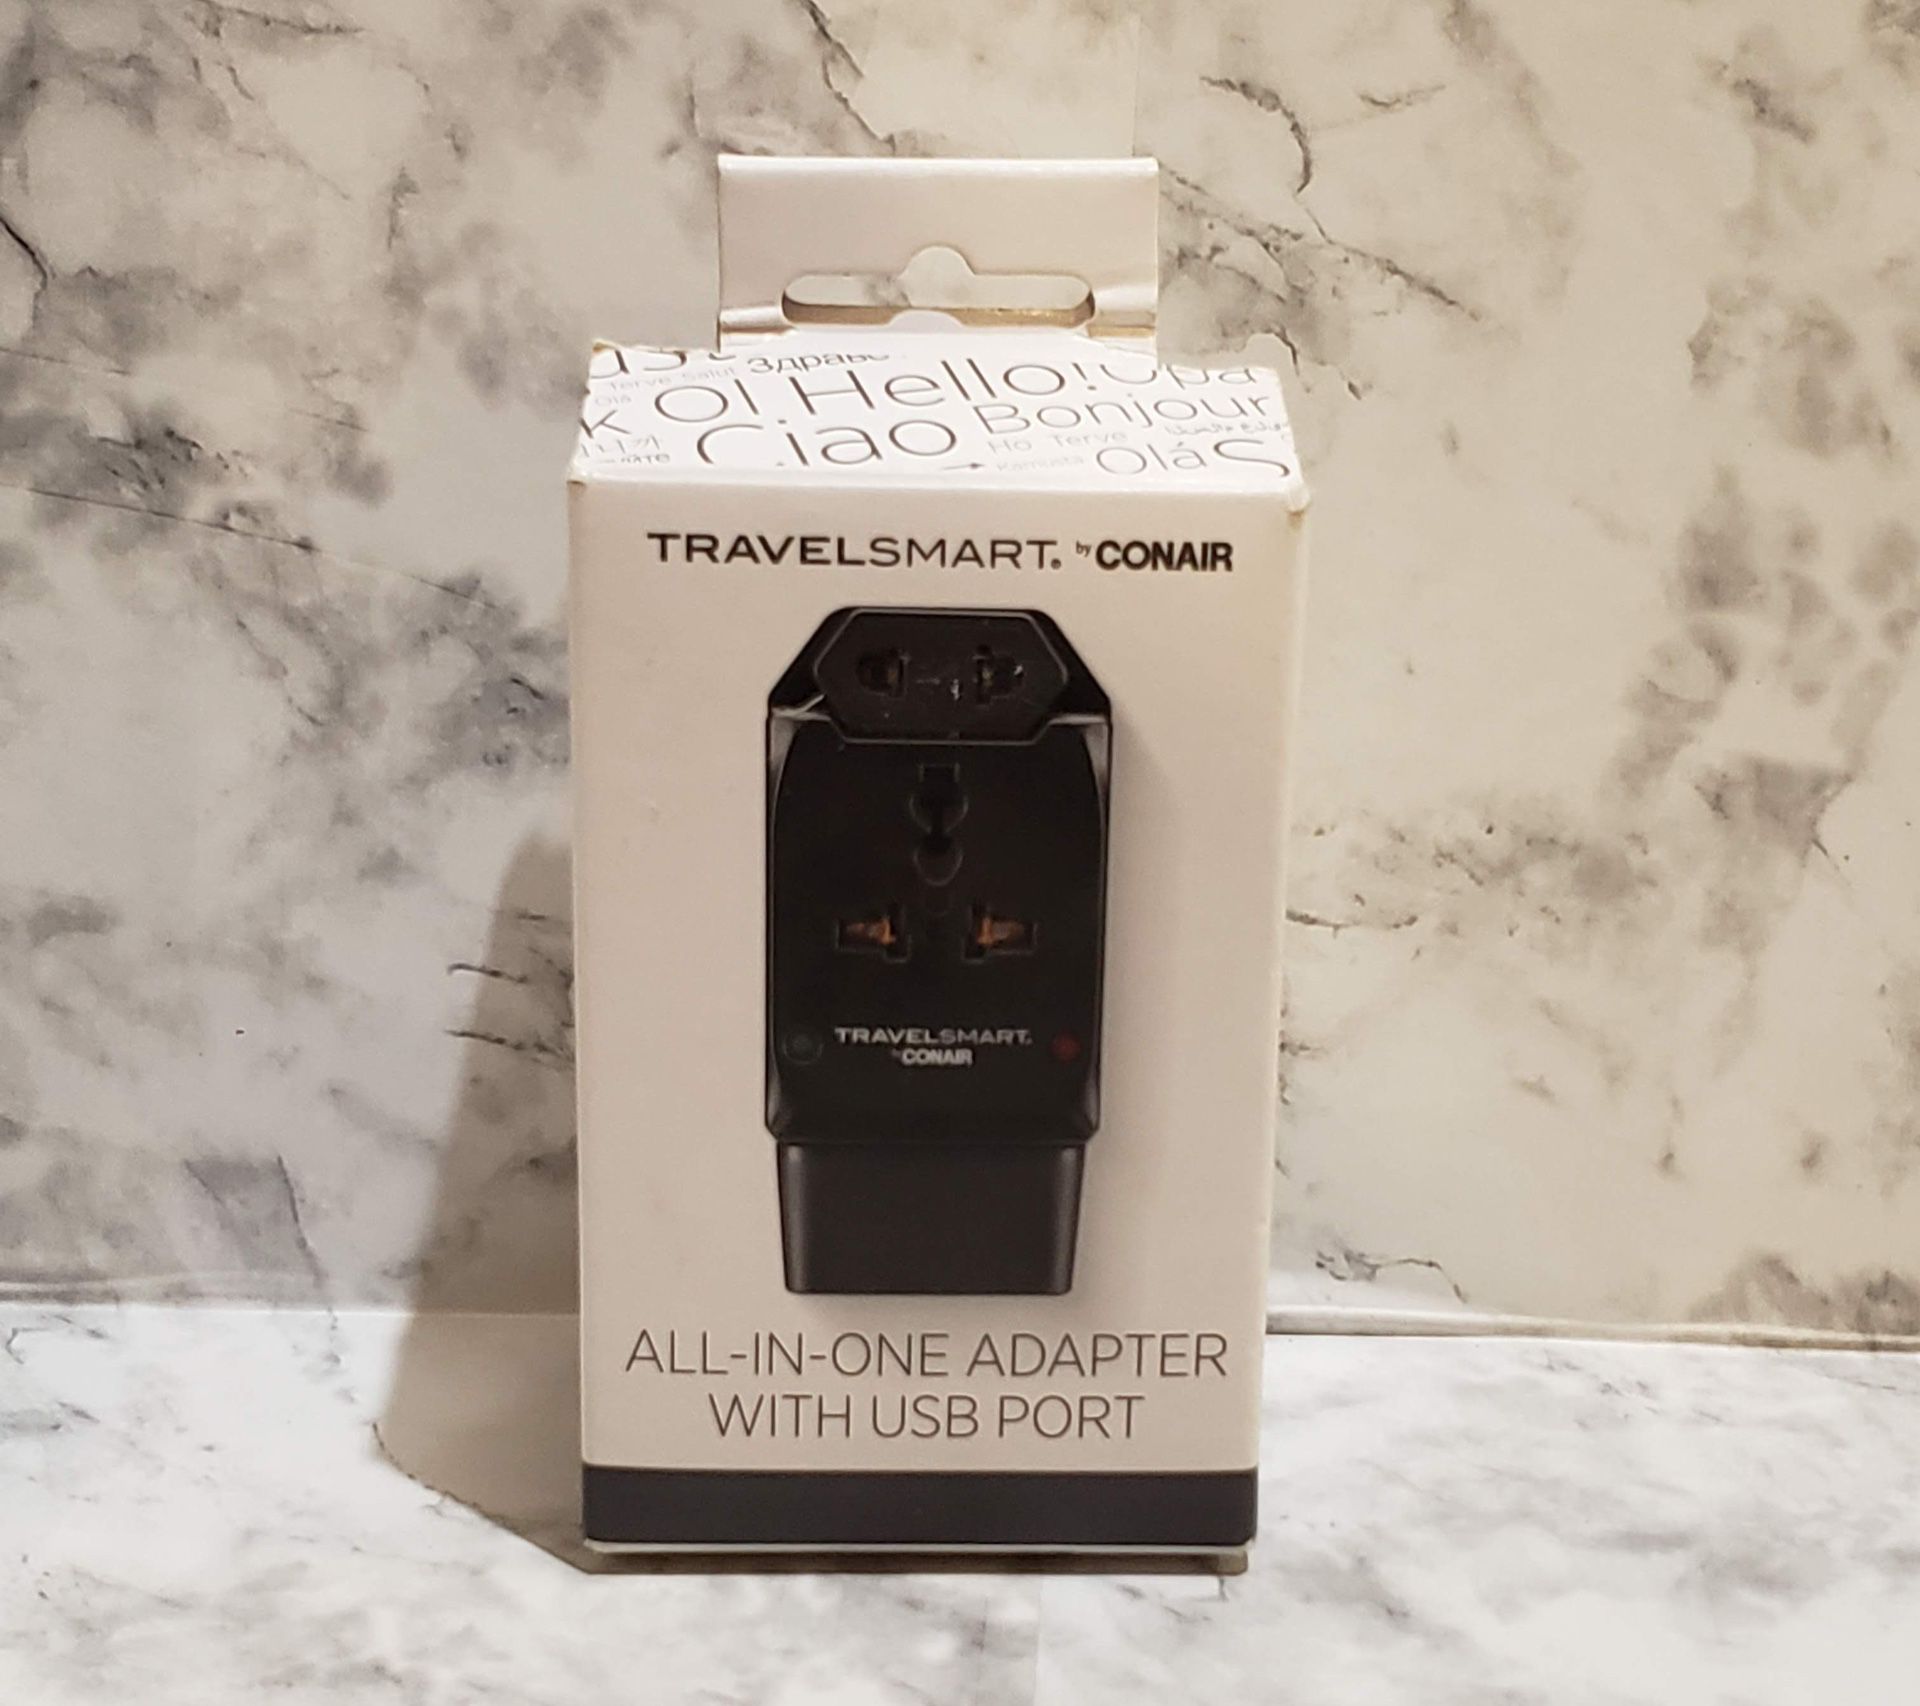 Travel Smart By Conair All-in-one Adapter With USB Port. Travel Adapter